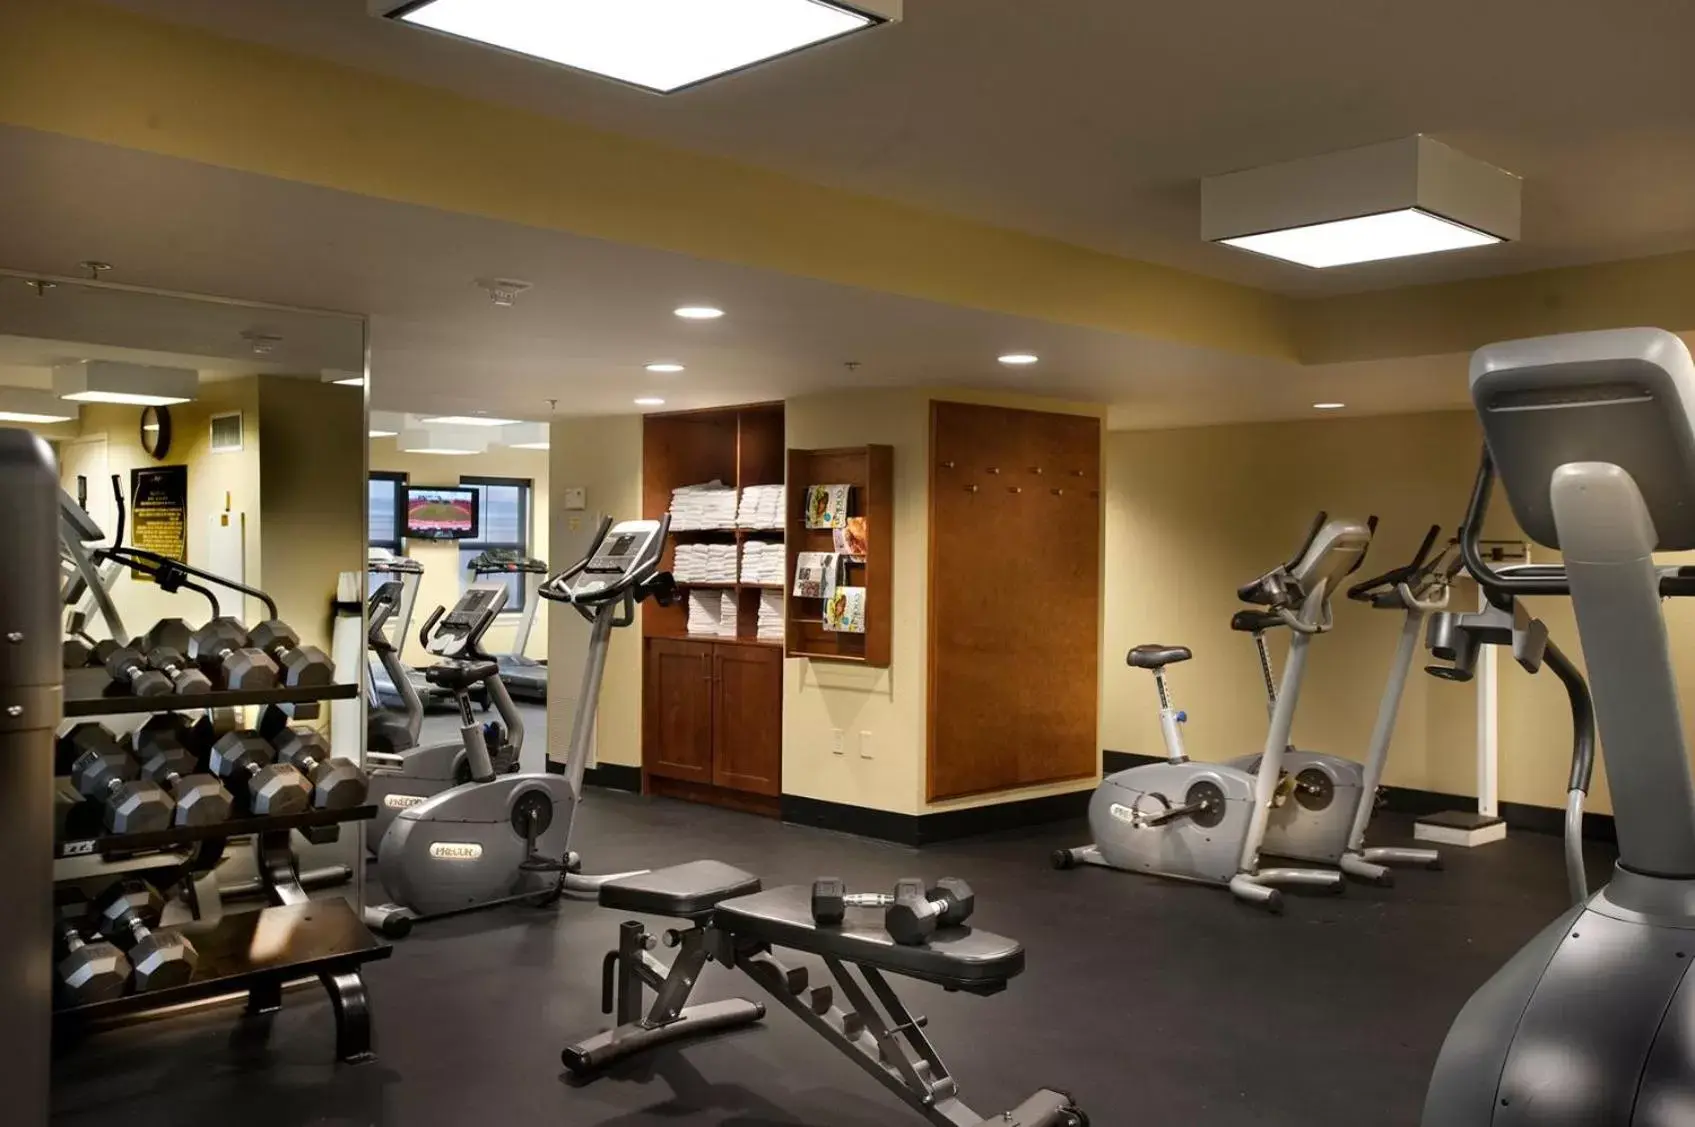 Fitness centre/facilities, Fitness Center/Facilities in Astor Crowne Plaza New Orleans French Quarter, Corner of Bourbon and Canal